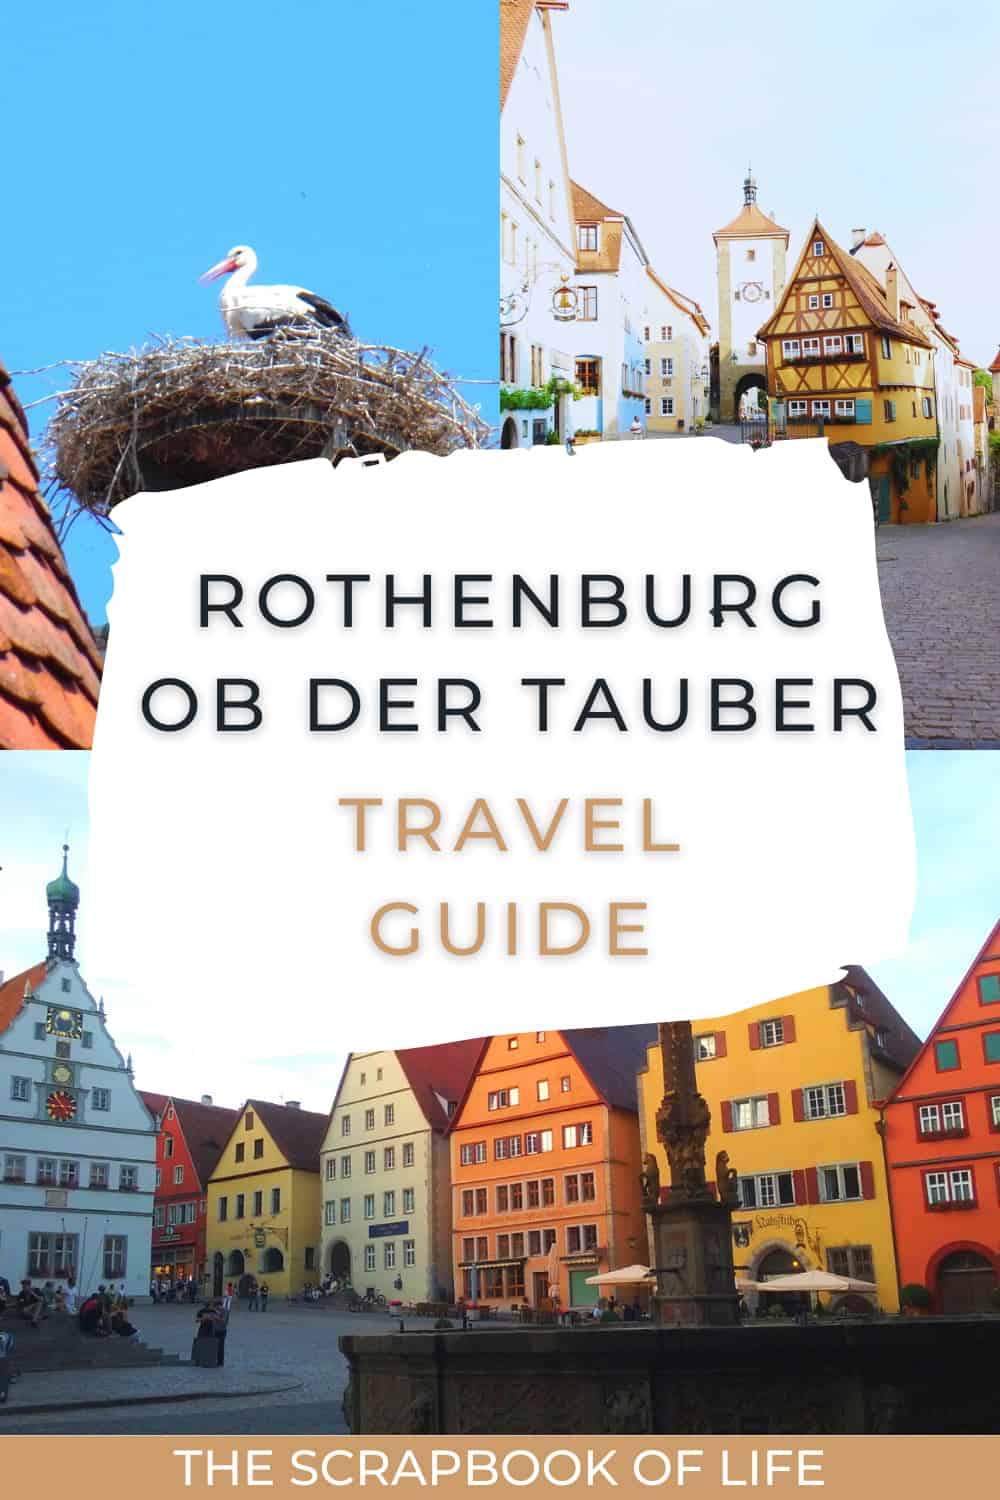 10+ Things To Do In Rothenburg ob der Tauber – Germany’s Fairytale Town!